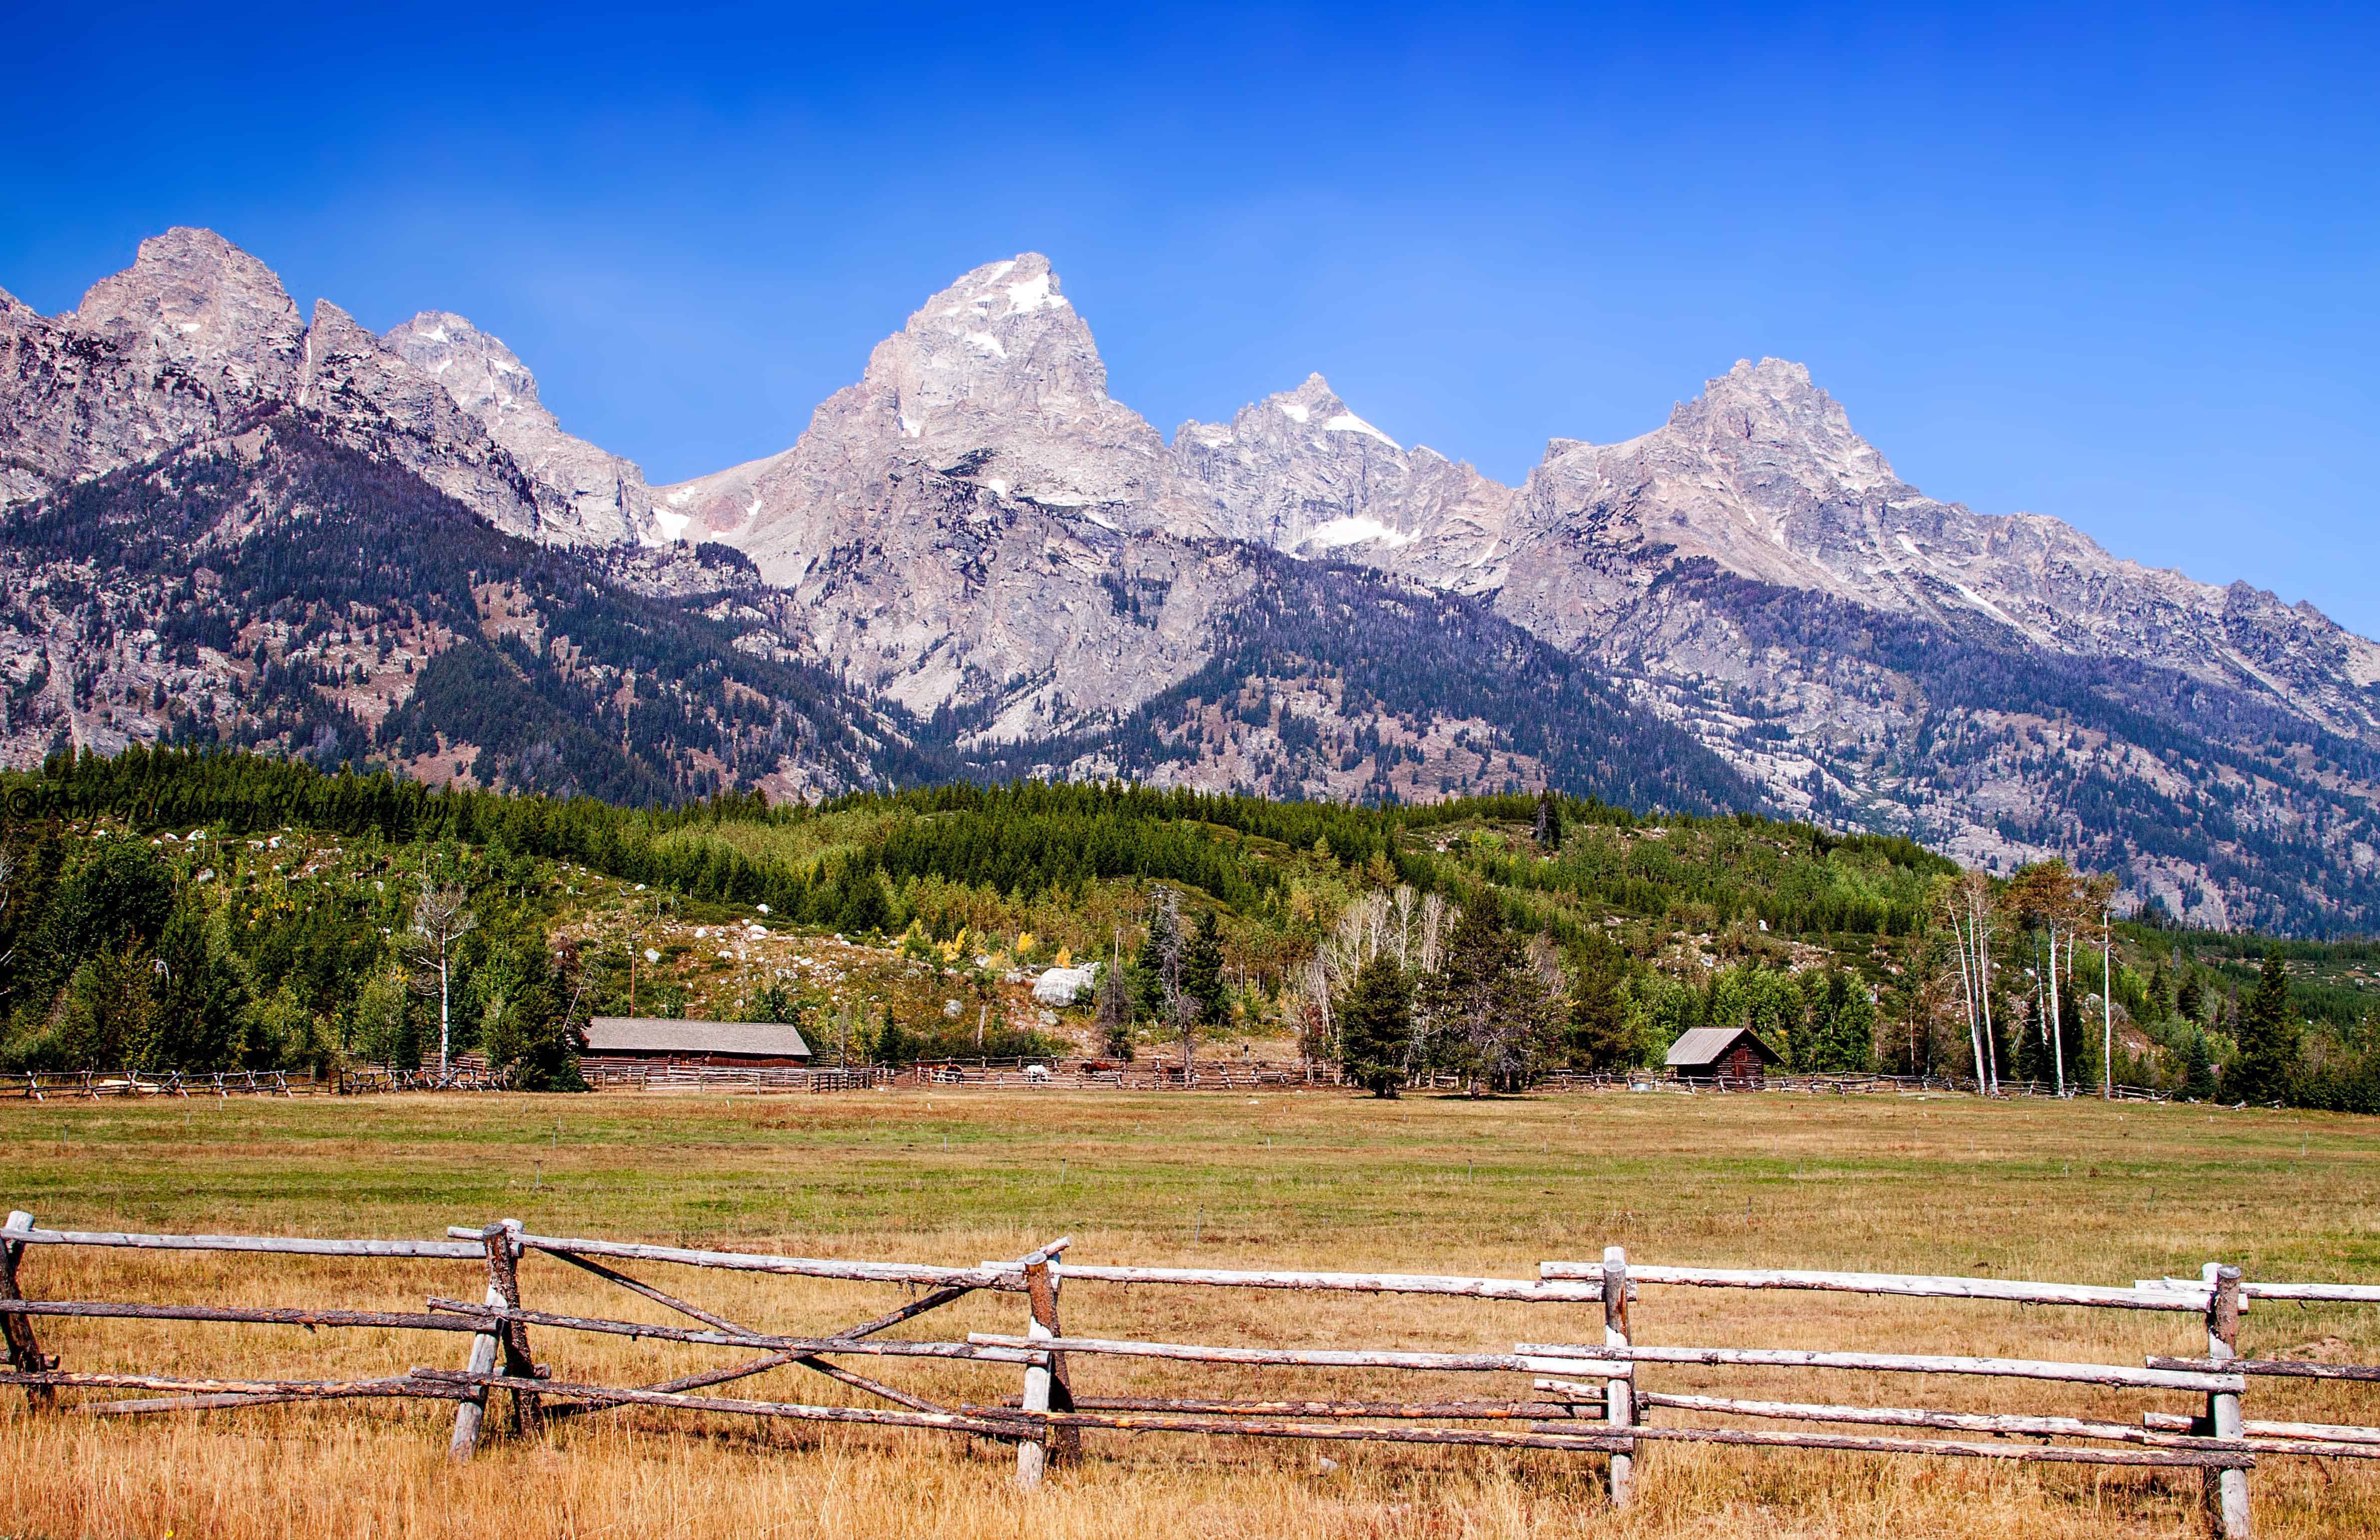 Grand Teton landscape with wooden fence and mountains.